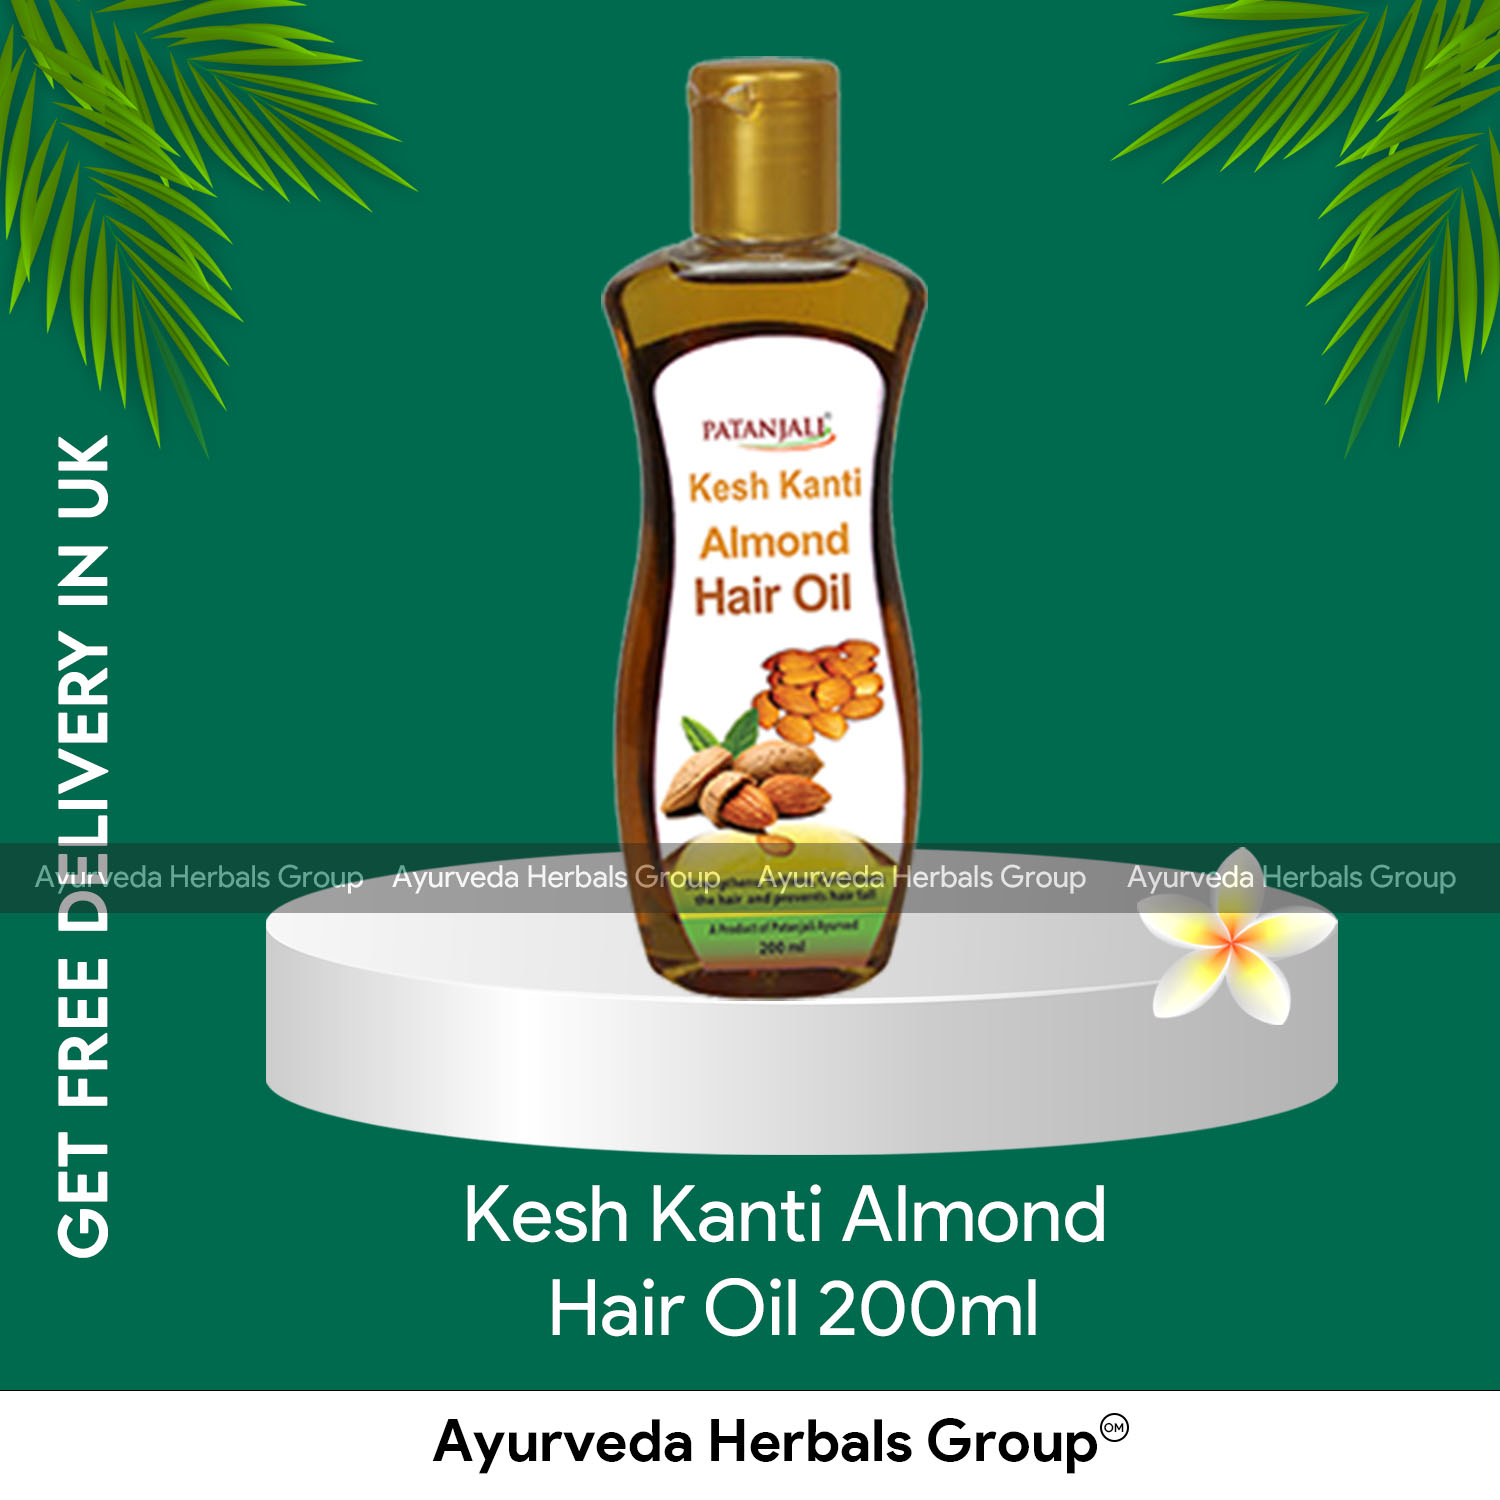 6 Best Patanjali Hair Oils For a Complete Ayurvedic Experience